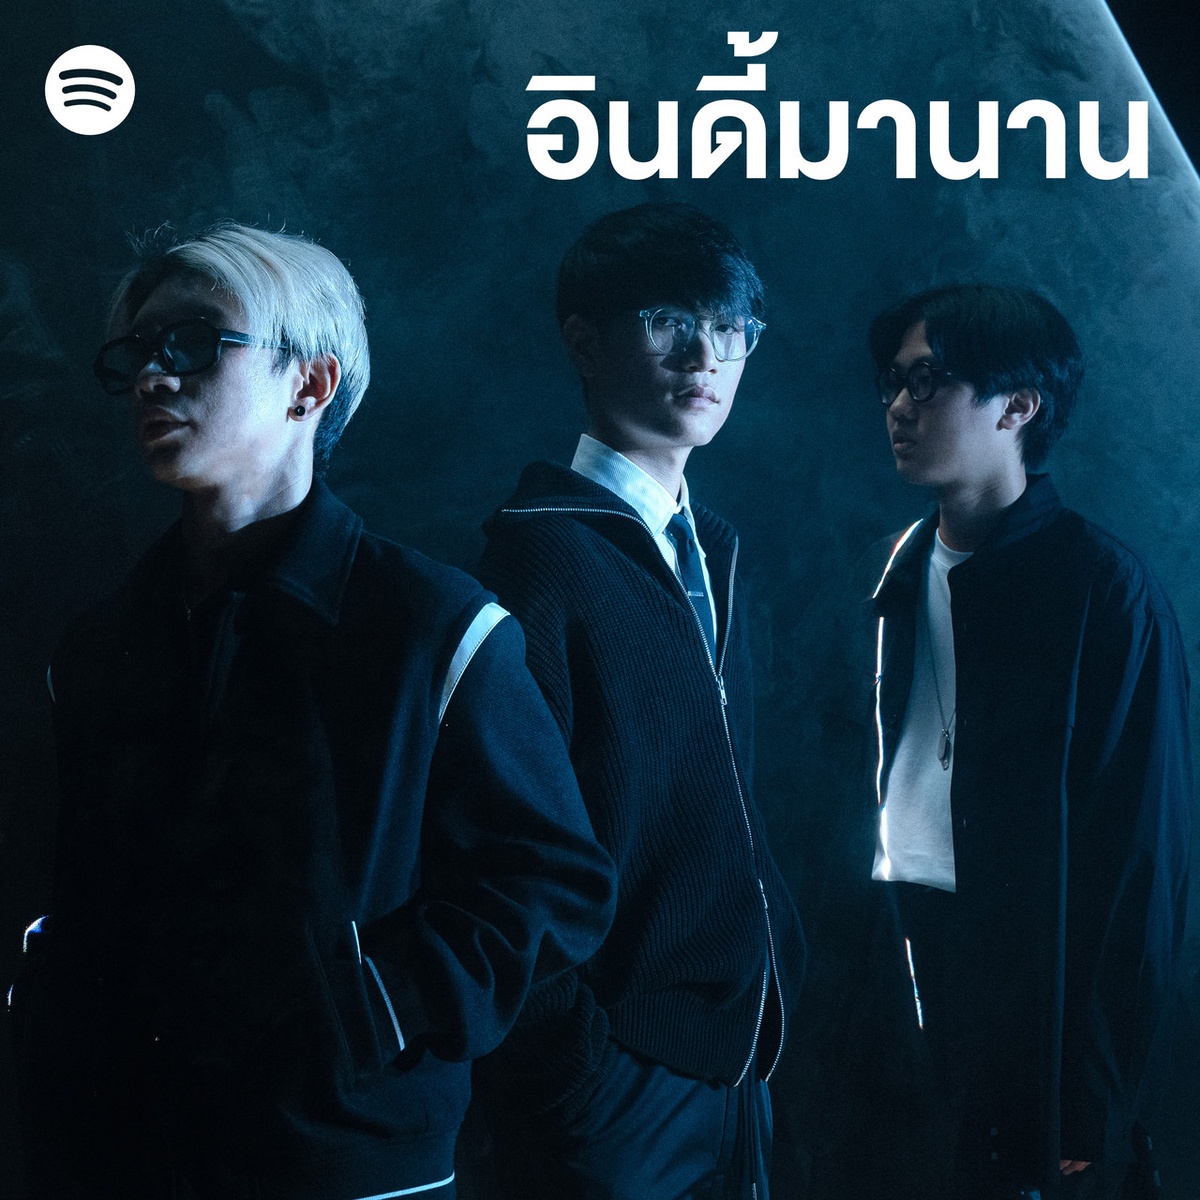 Spotify celebrates Thai Indie with a relaunch of its flagship Indie playlist, now called อินดี้ศาสตร์ Indieology hits Thailand